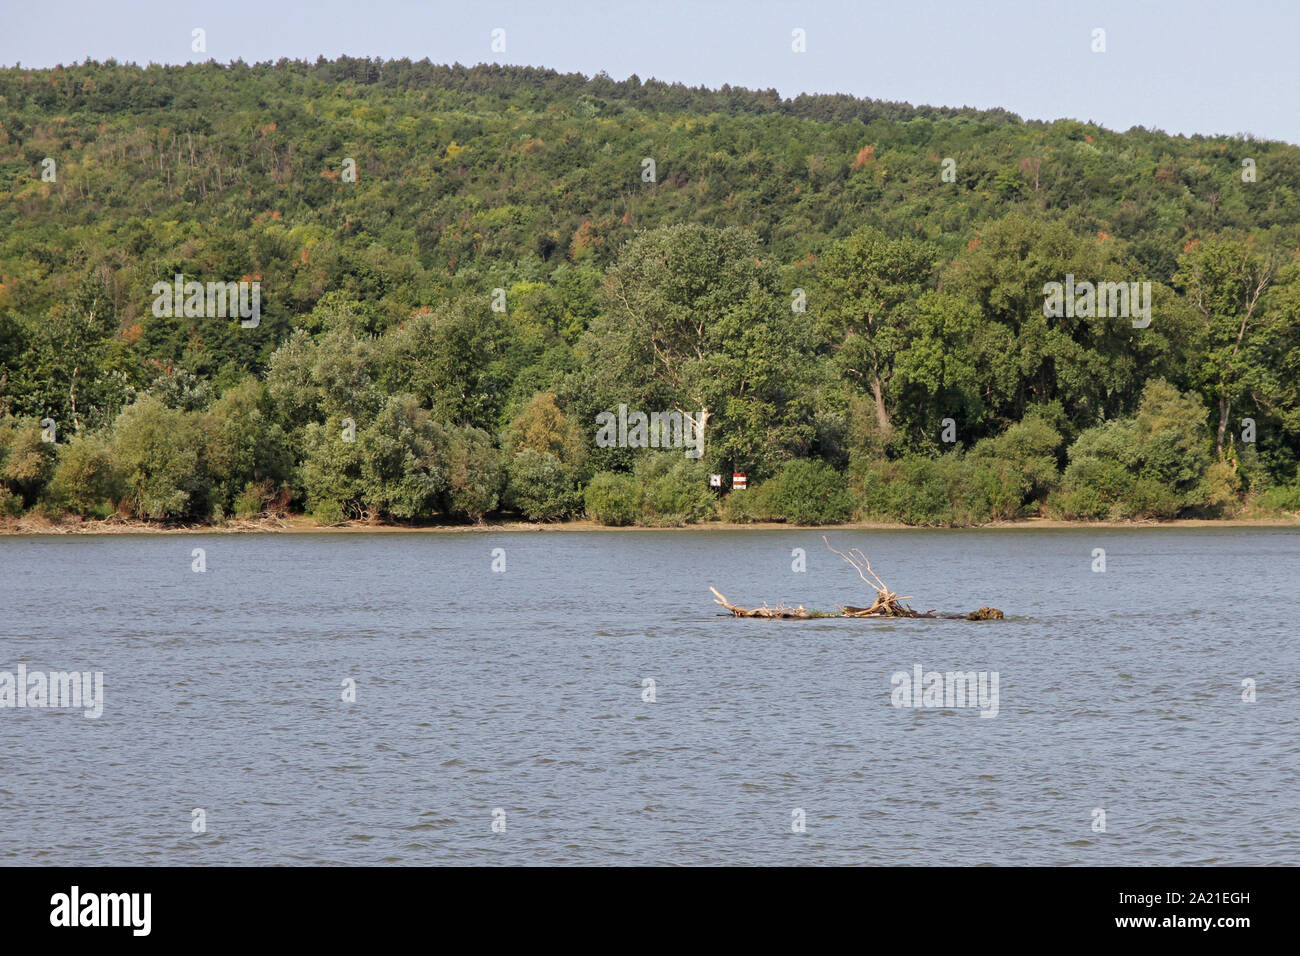 Forest on hill on the Danube River Bank near Belgrade, Serbia. Stock Photo